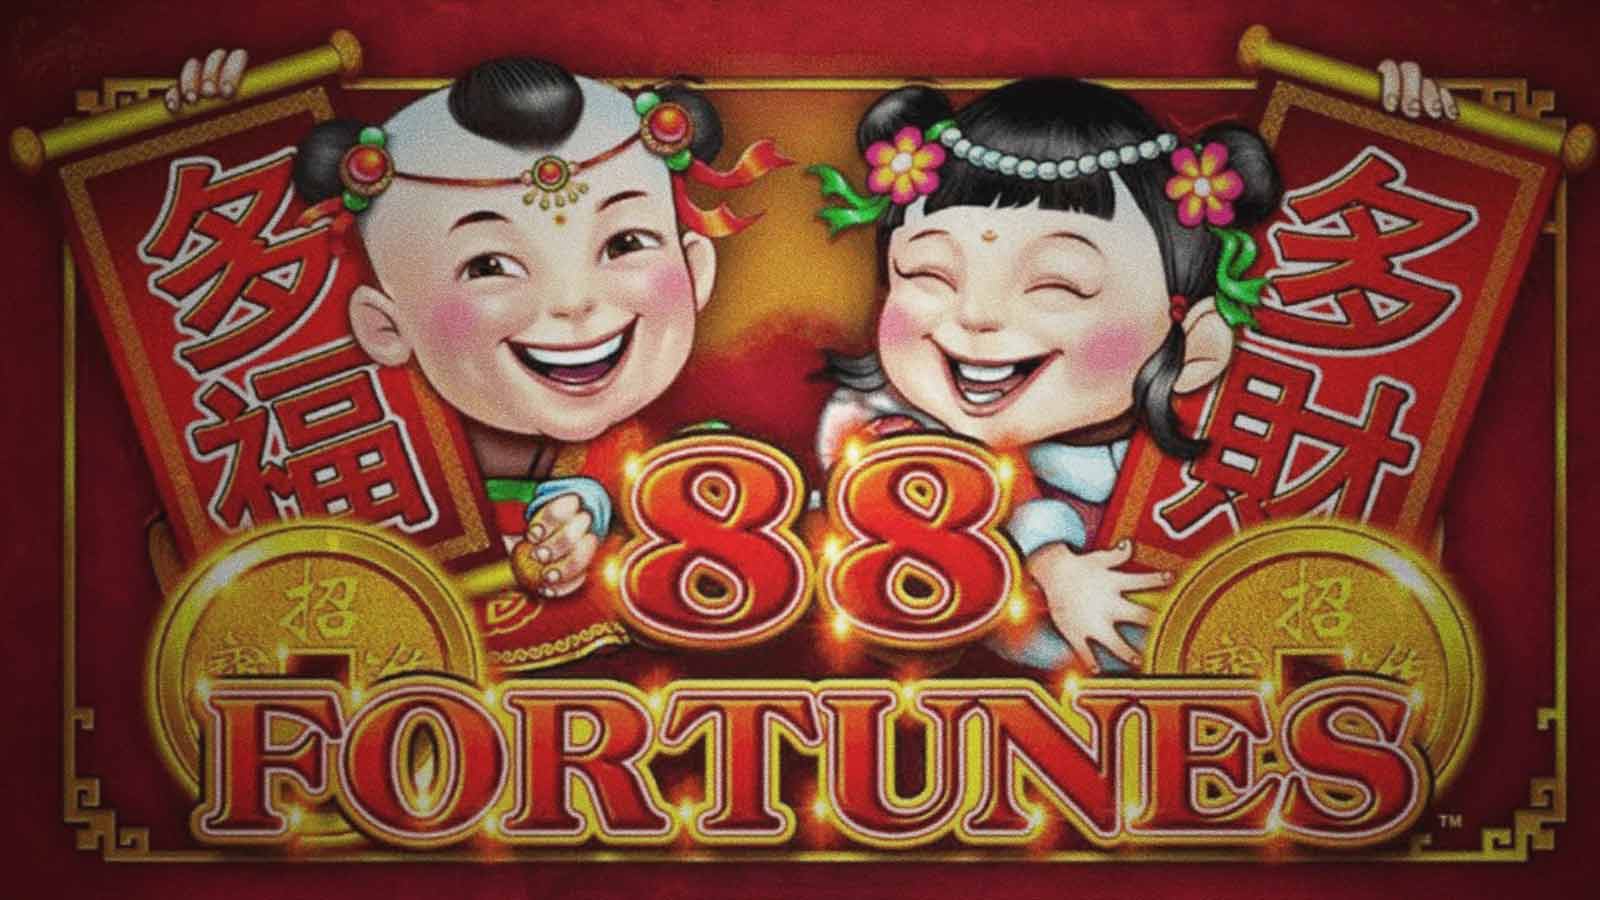 Play ShuffleMster's 88 Fortune Slot Machine Online for Free or Real Money